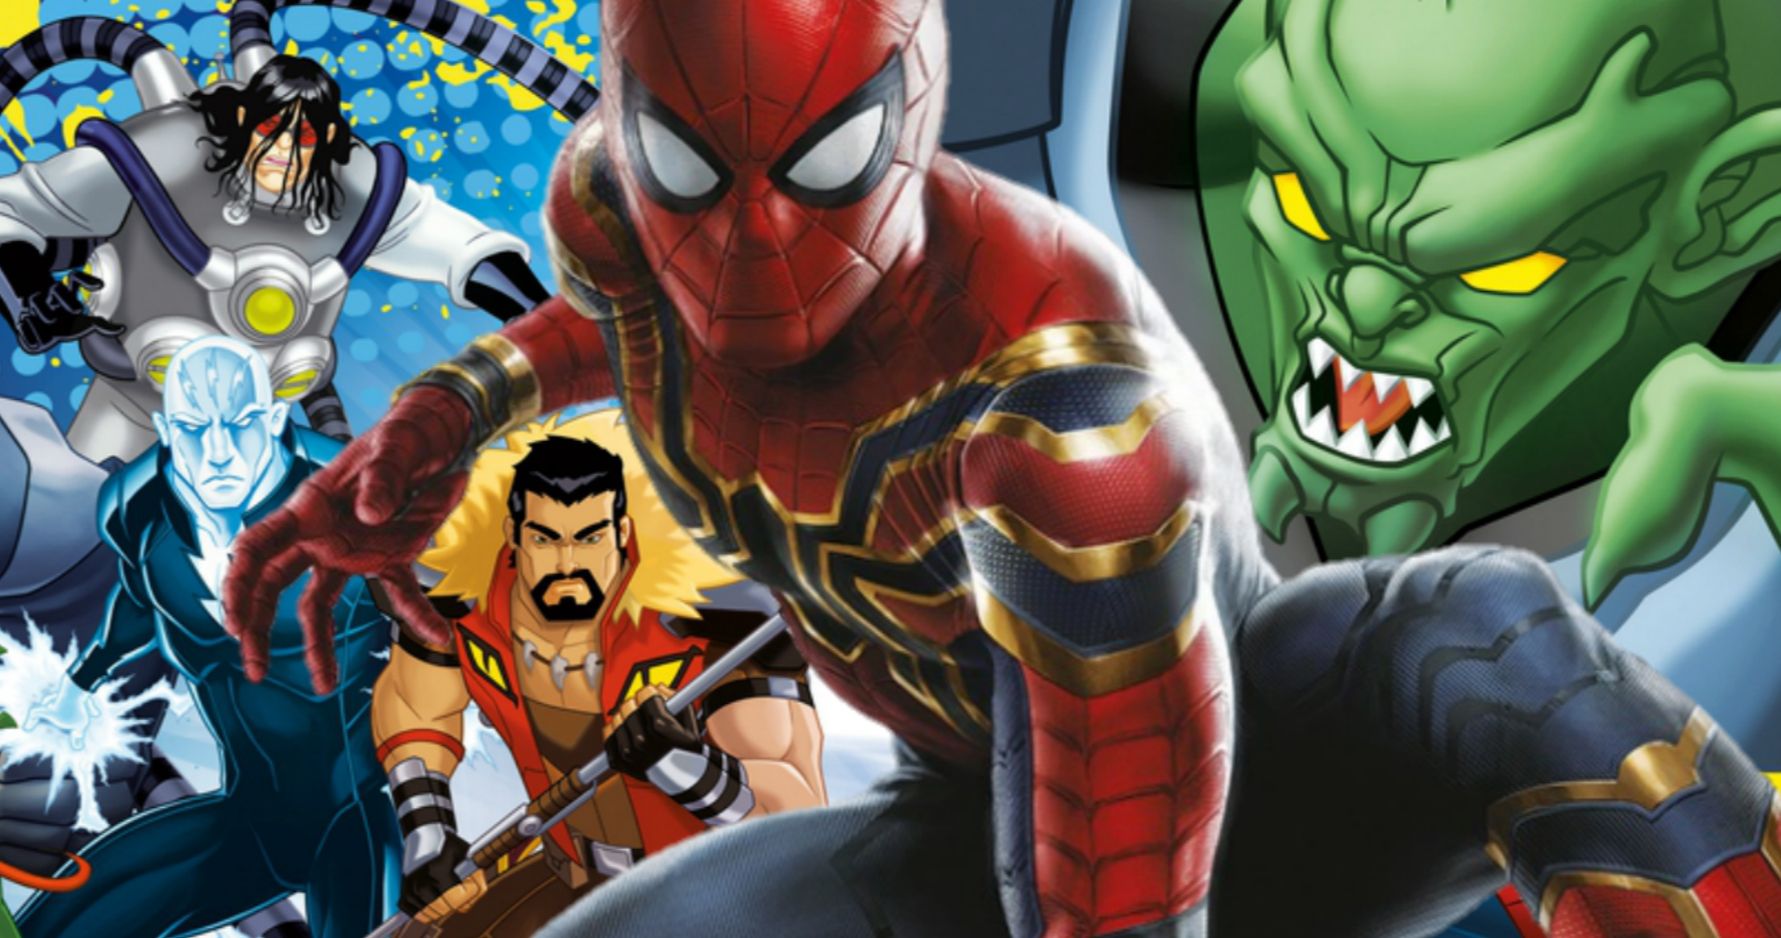 Is Spider-Man 3 Bringing the Sinister Six to the MCU?